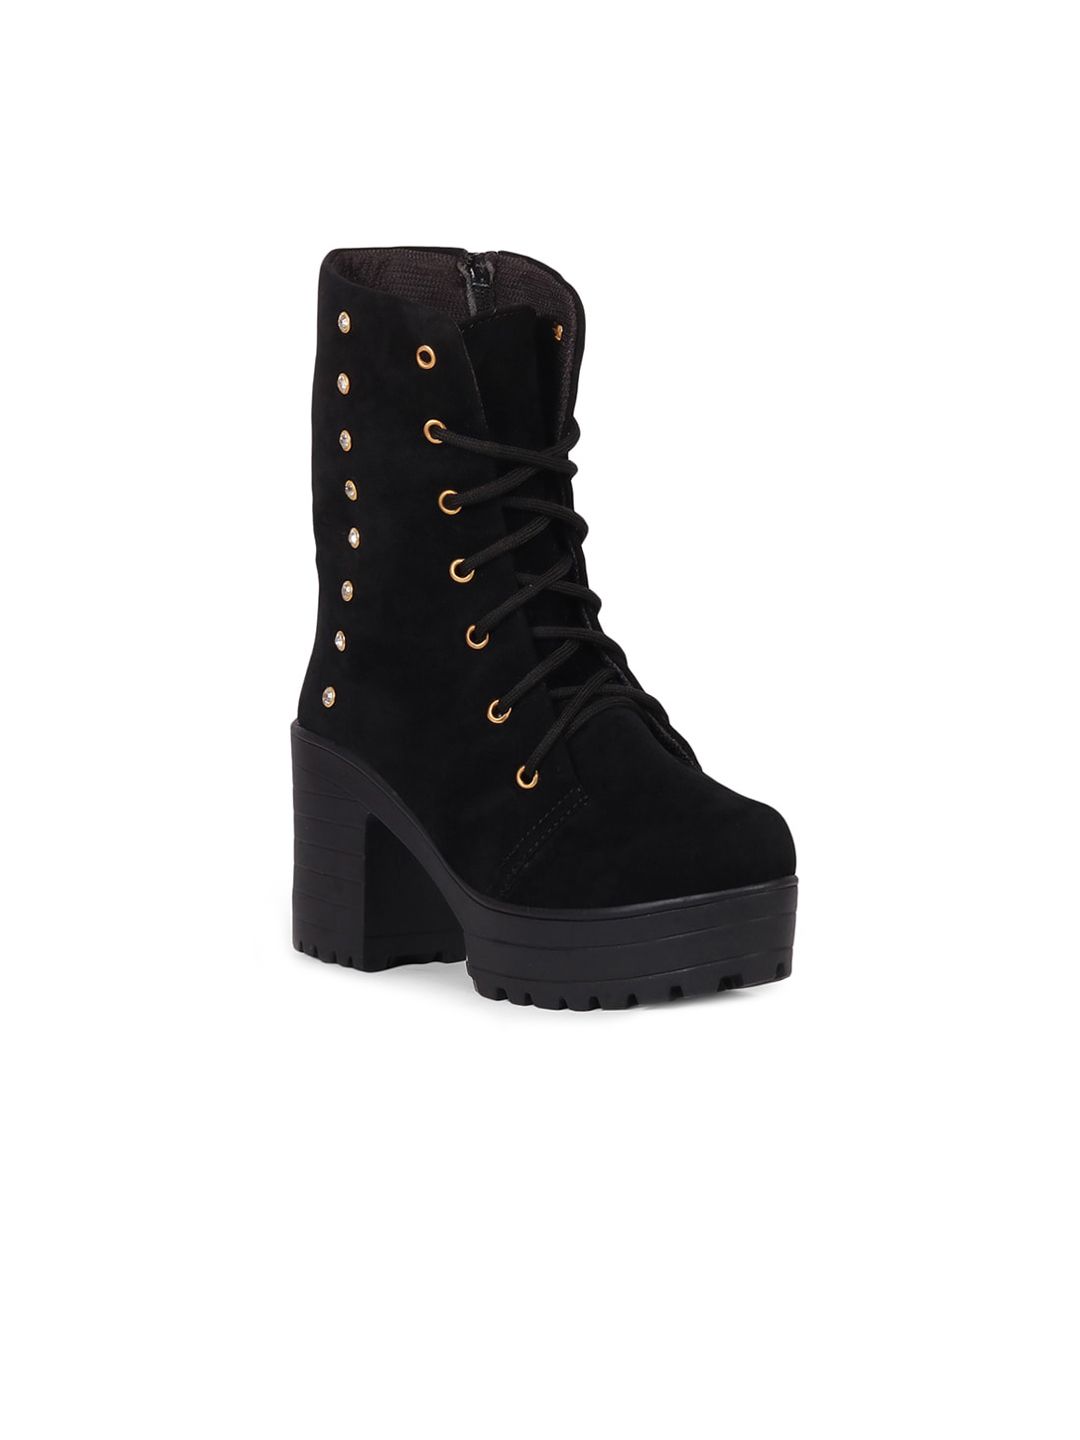 TWIN TOES Black Suede High-Top Block Heeled Boots with Laser Cuts Price in India